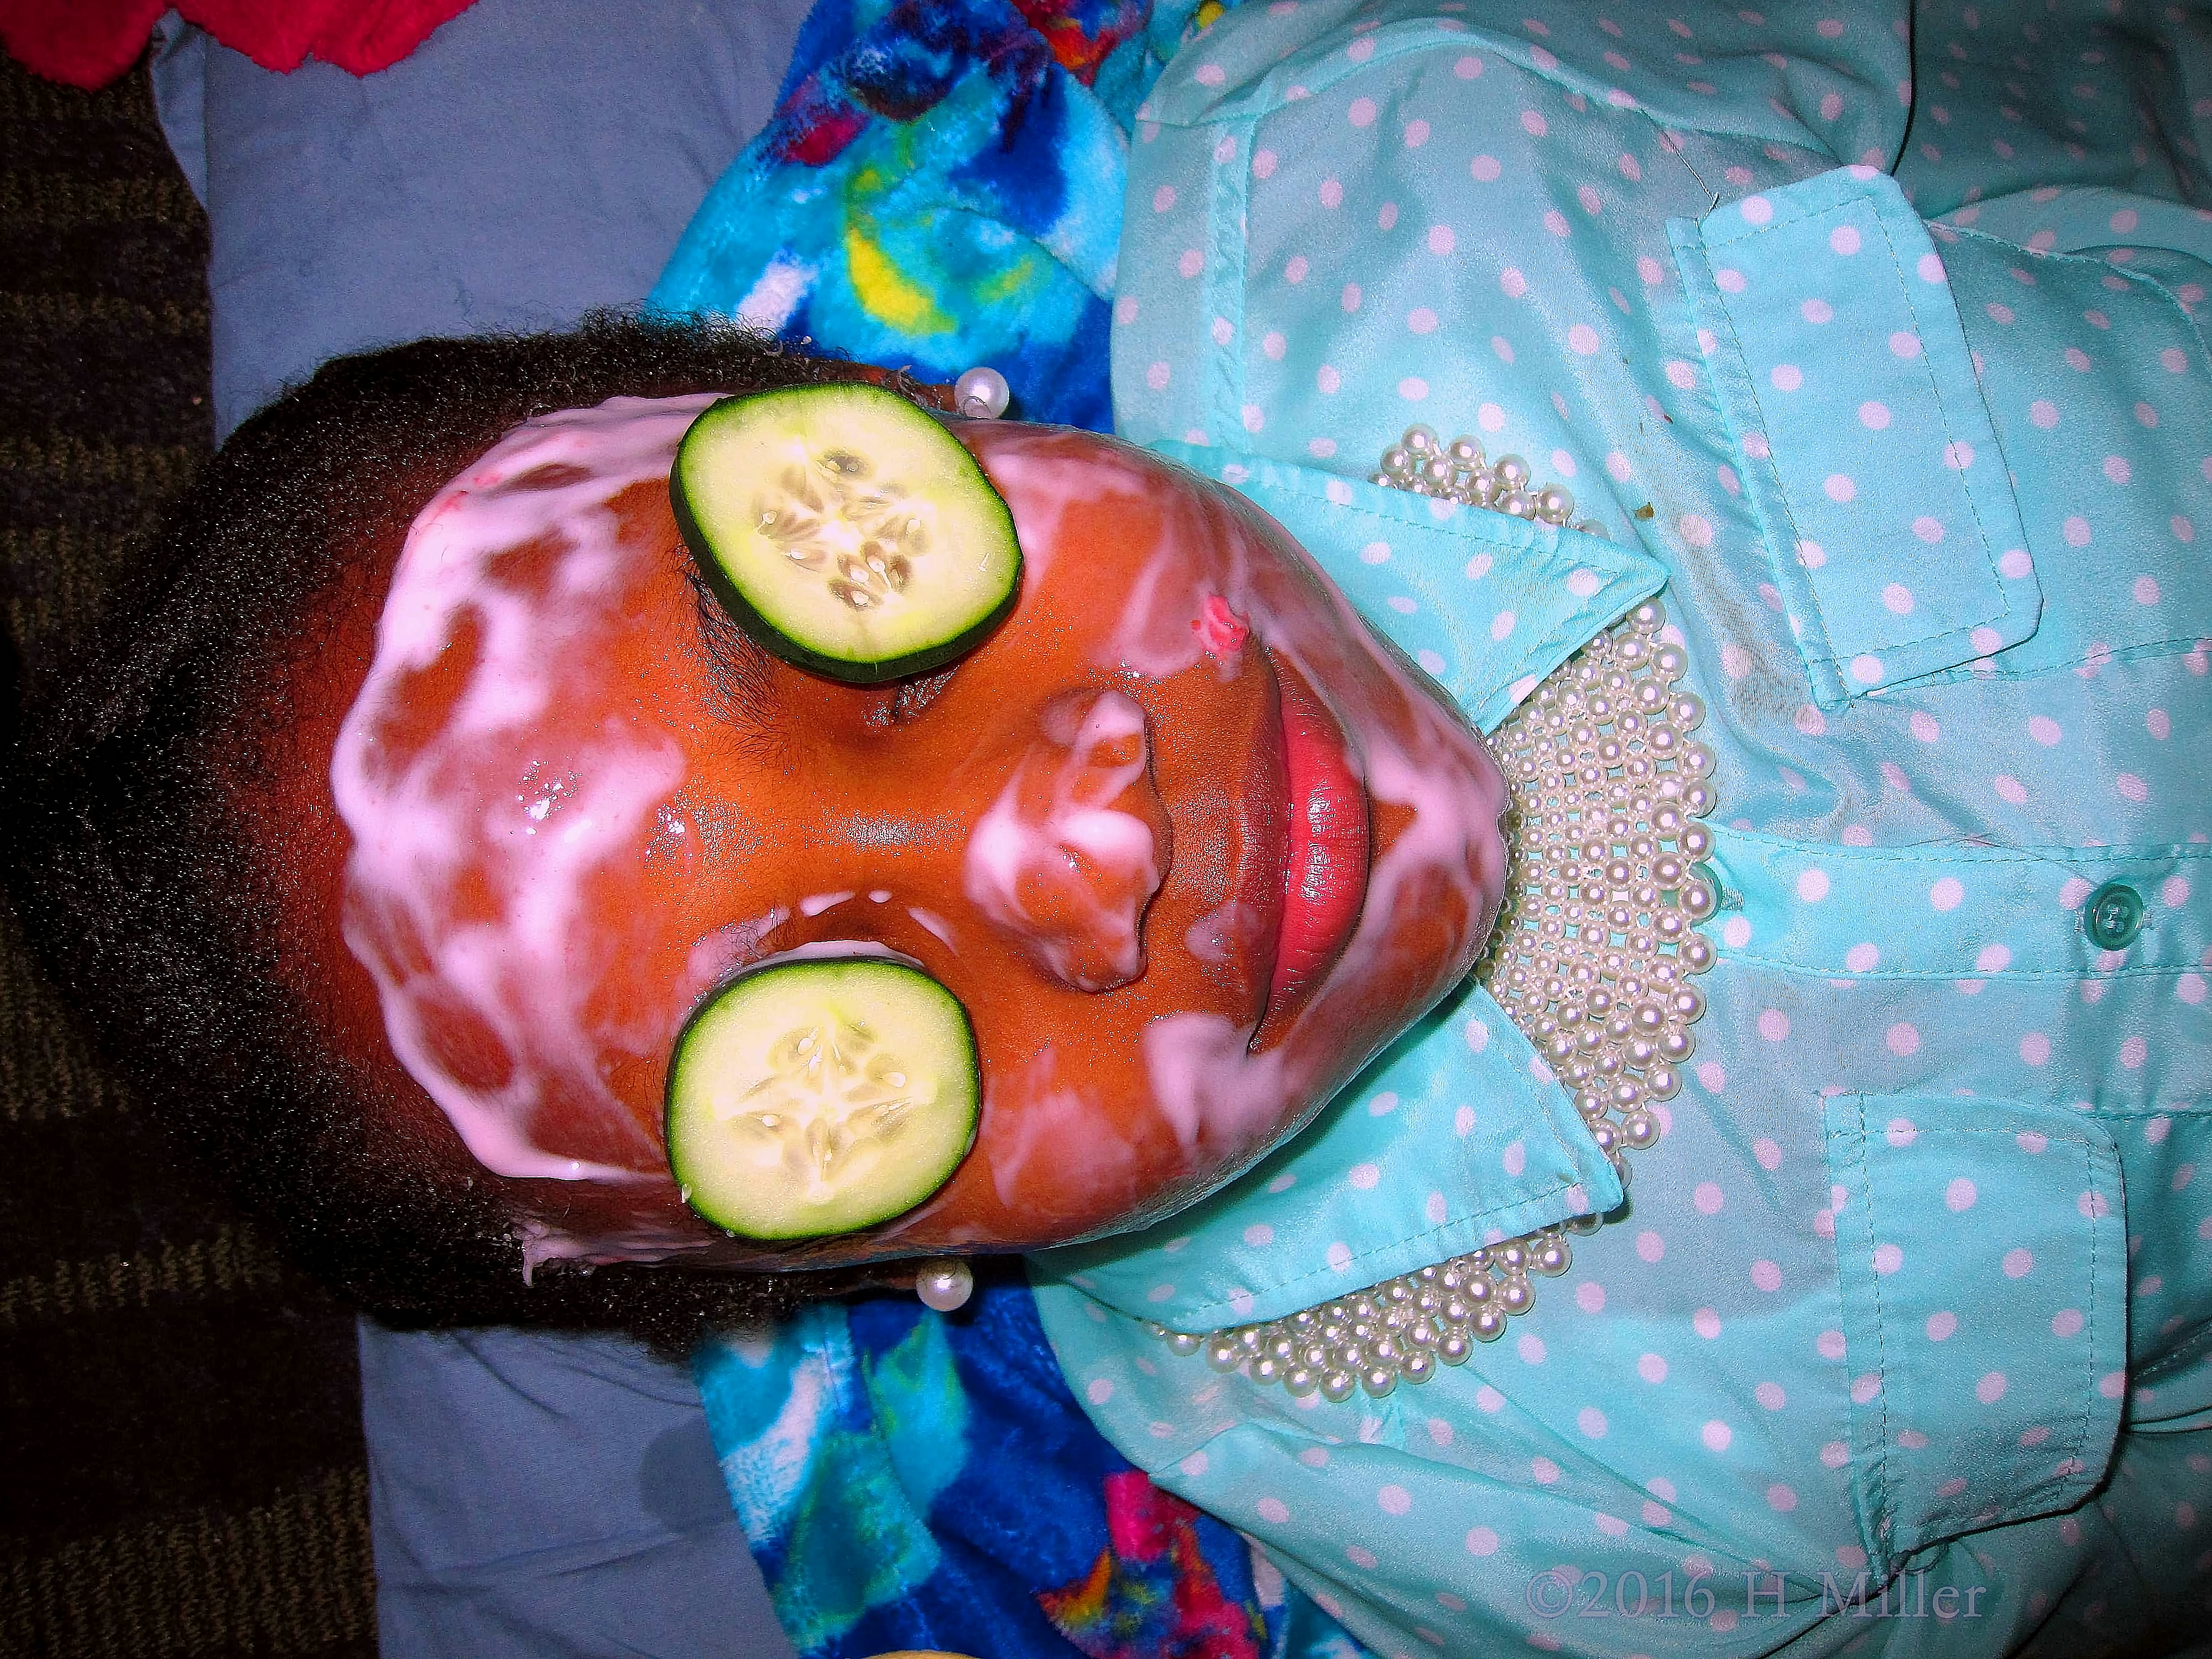 Close View Of Kids Facial With Cukes On Her Eyes. 